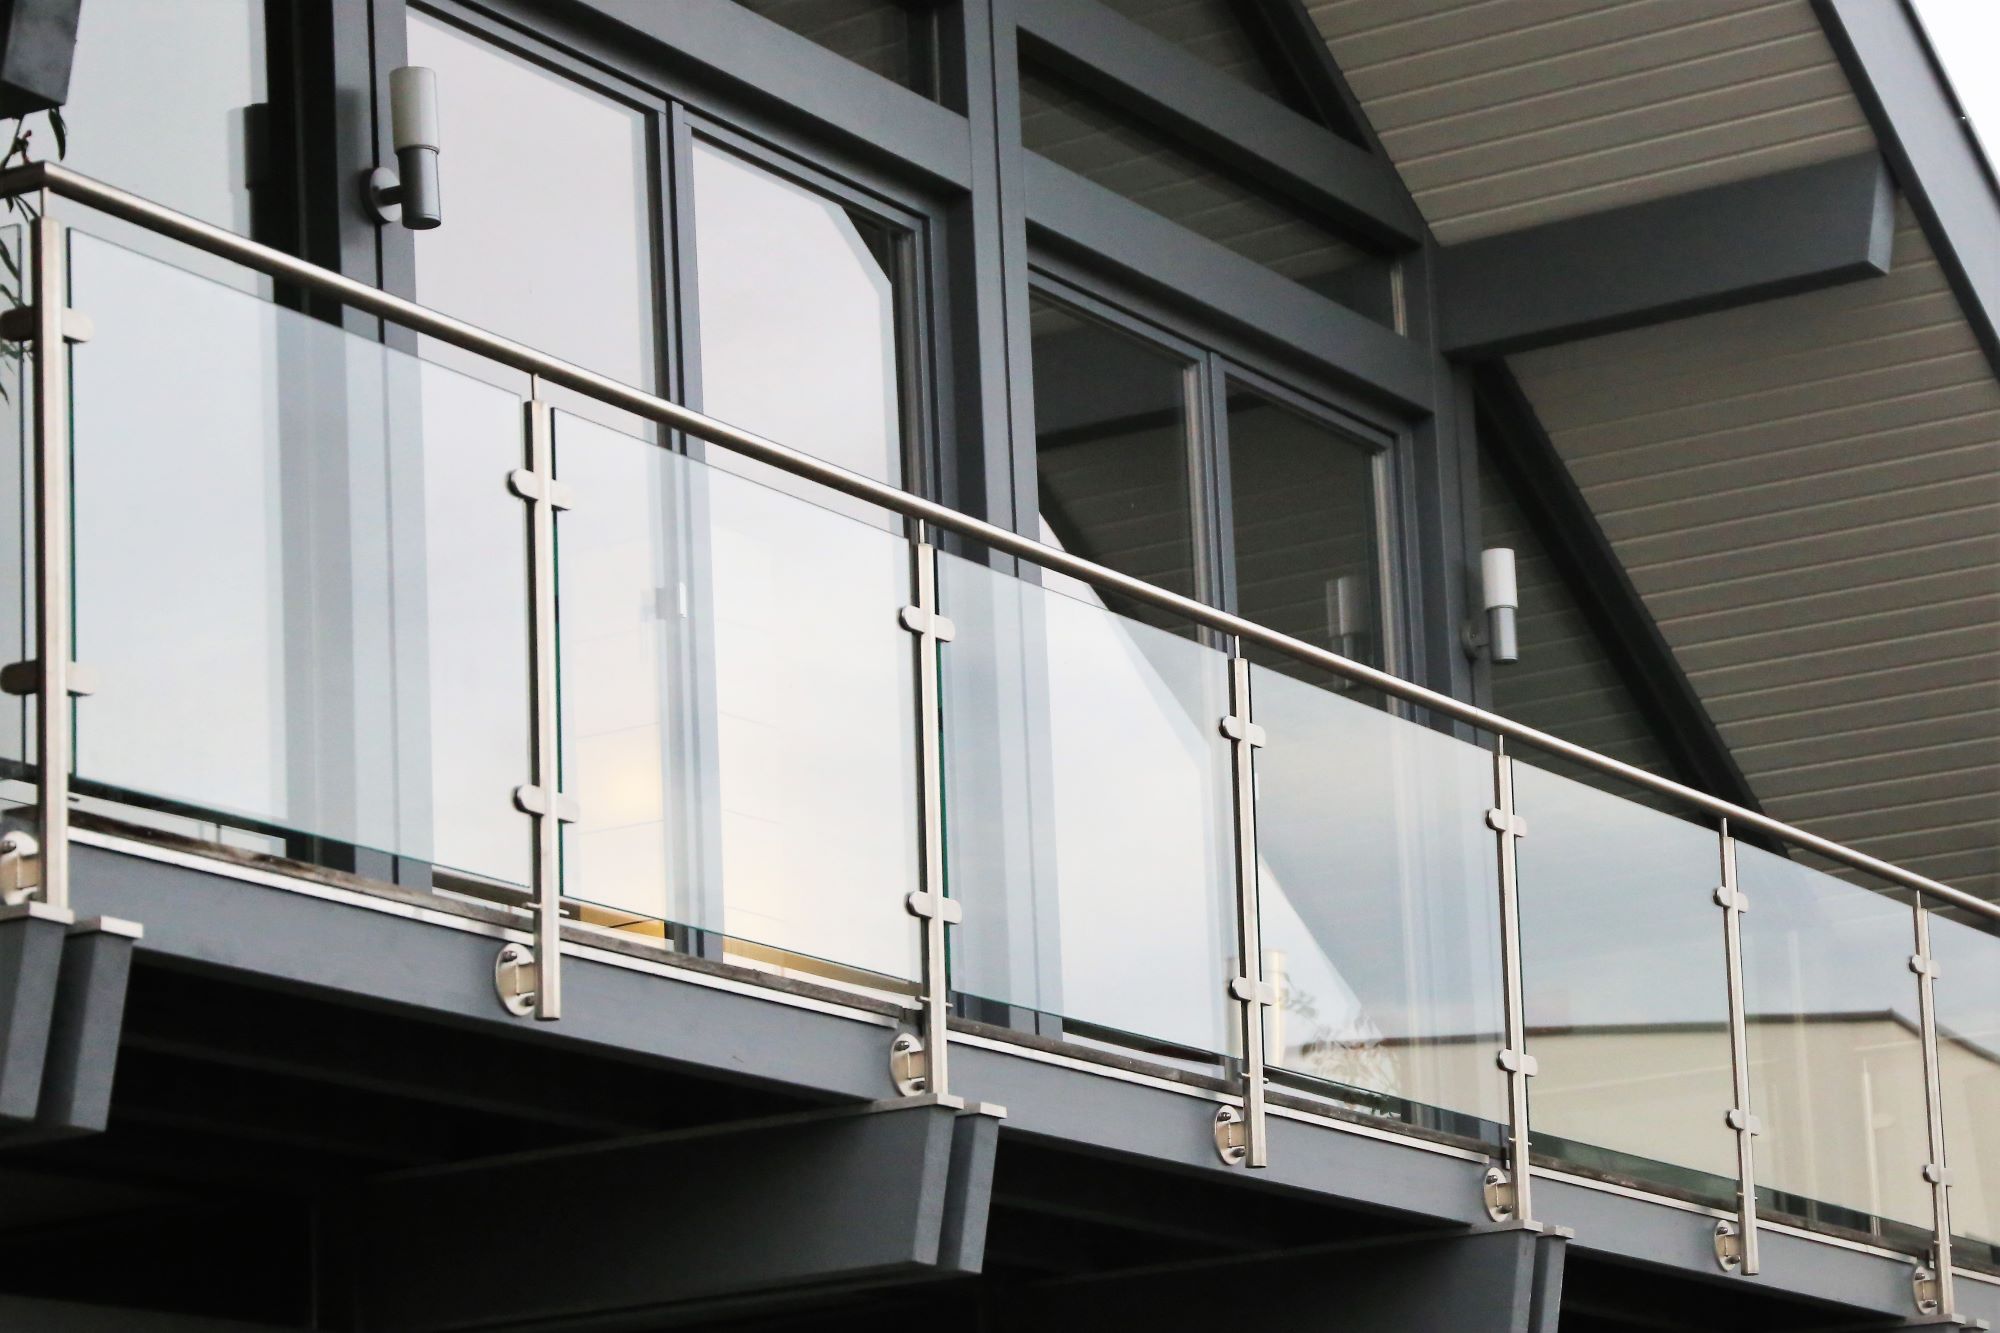 What you need to know about balustrades regulations in Australia